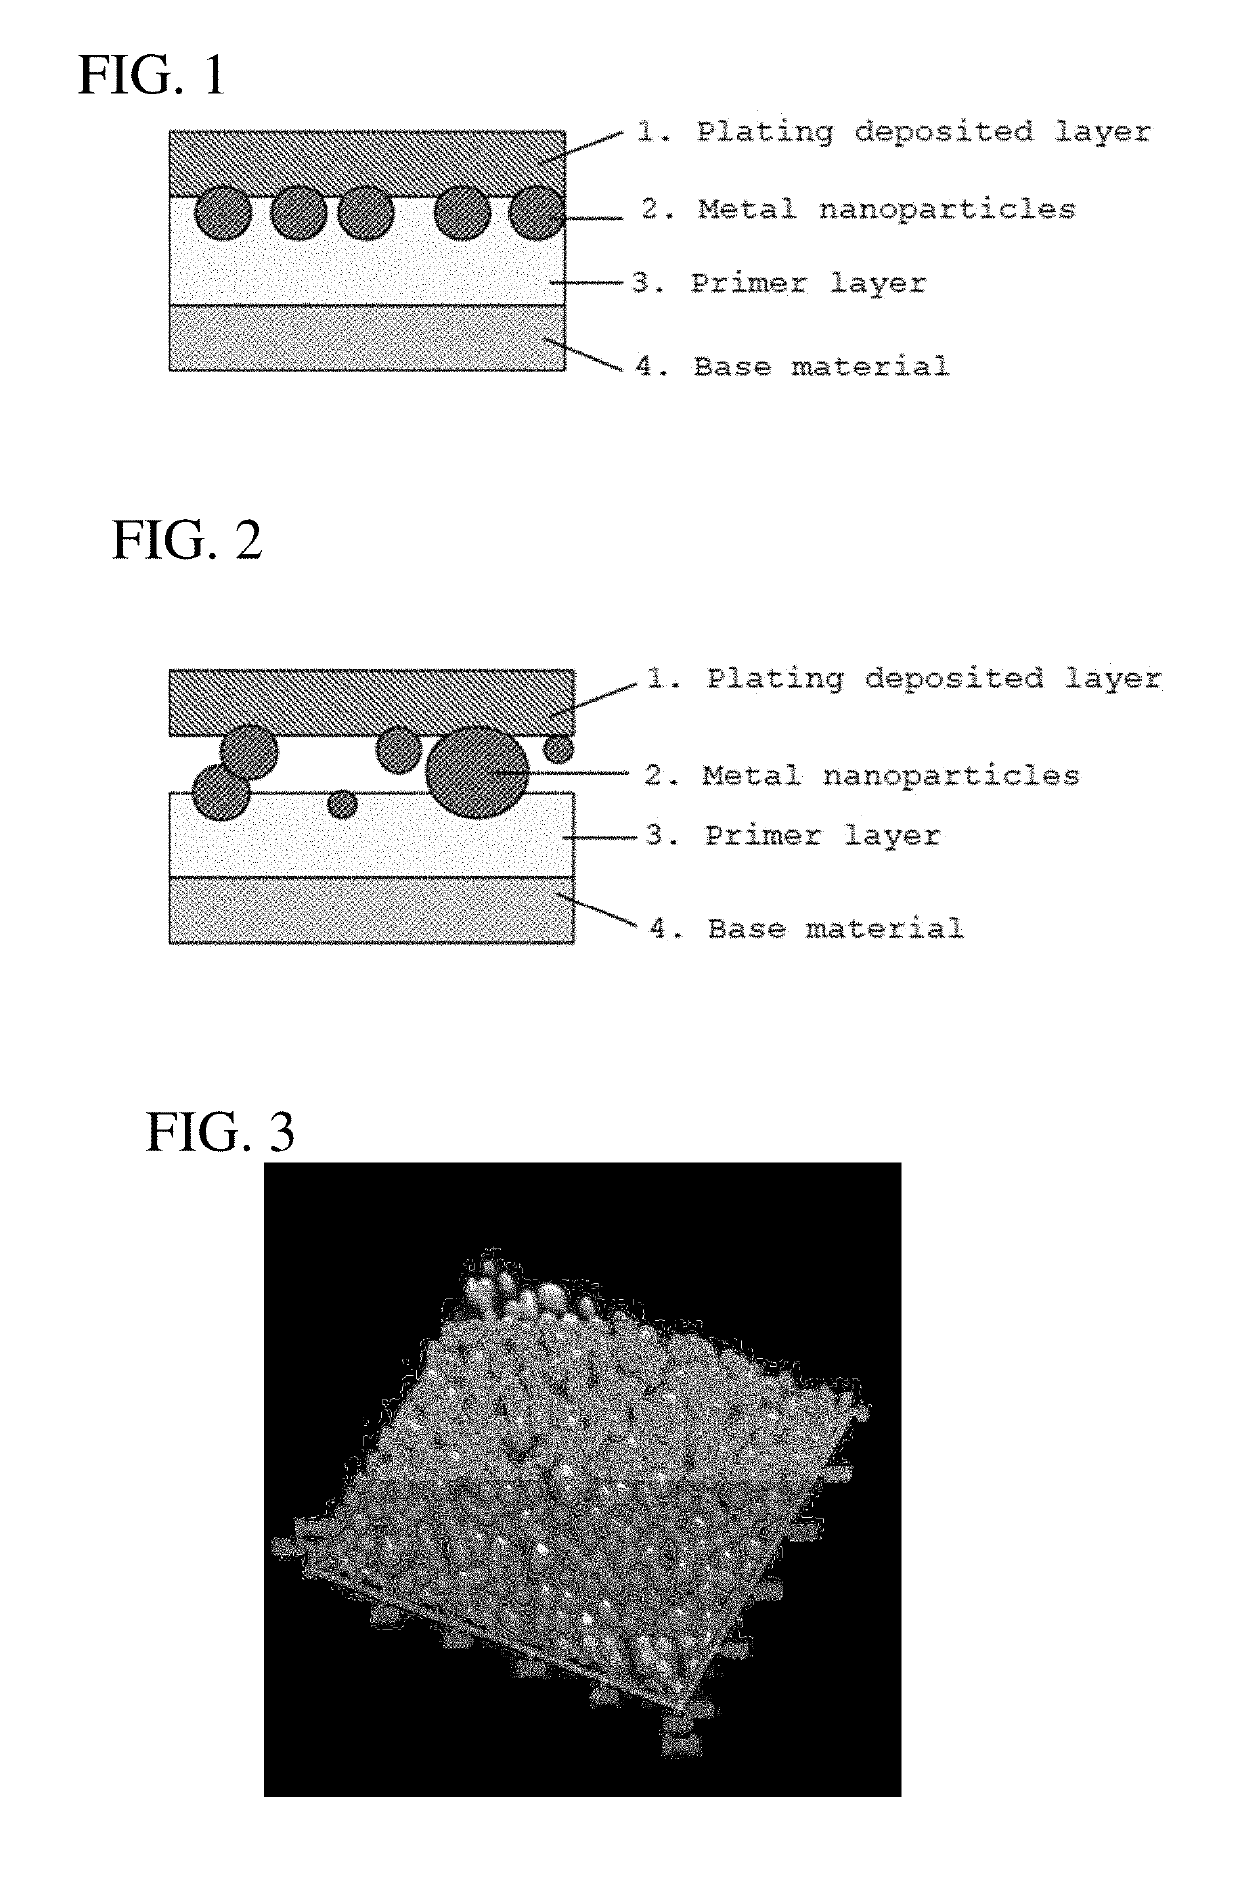 Laminate structure of metal coating